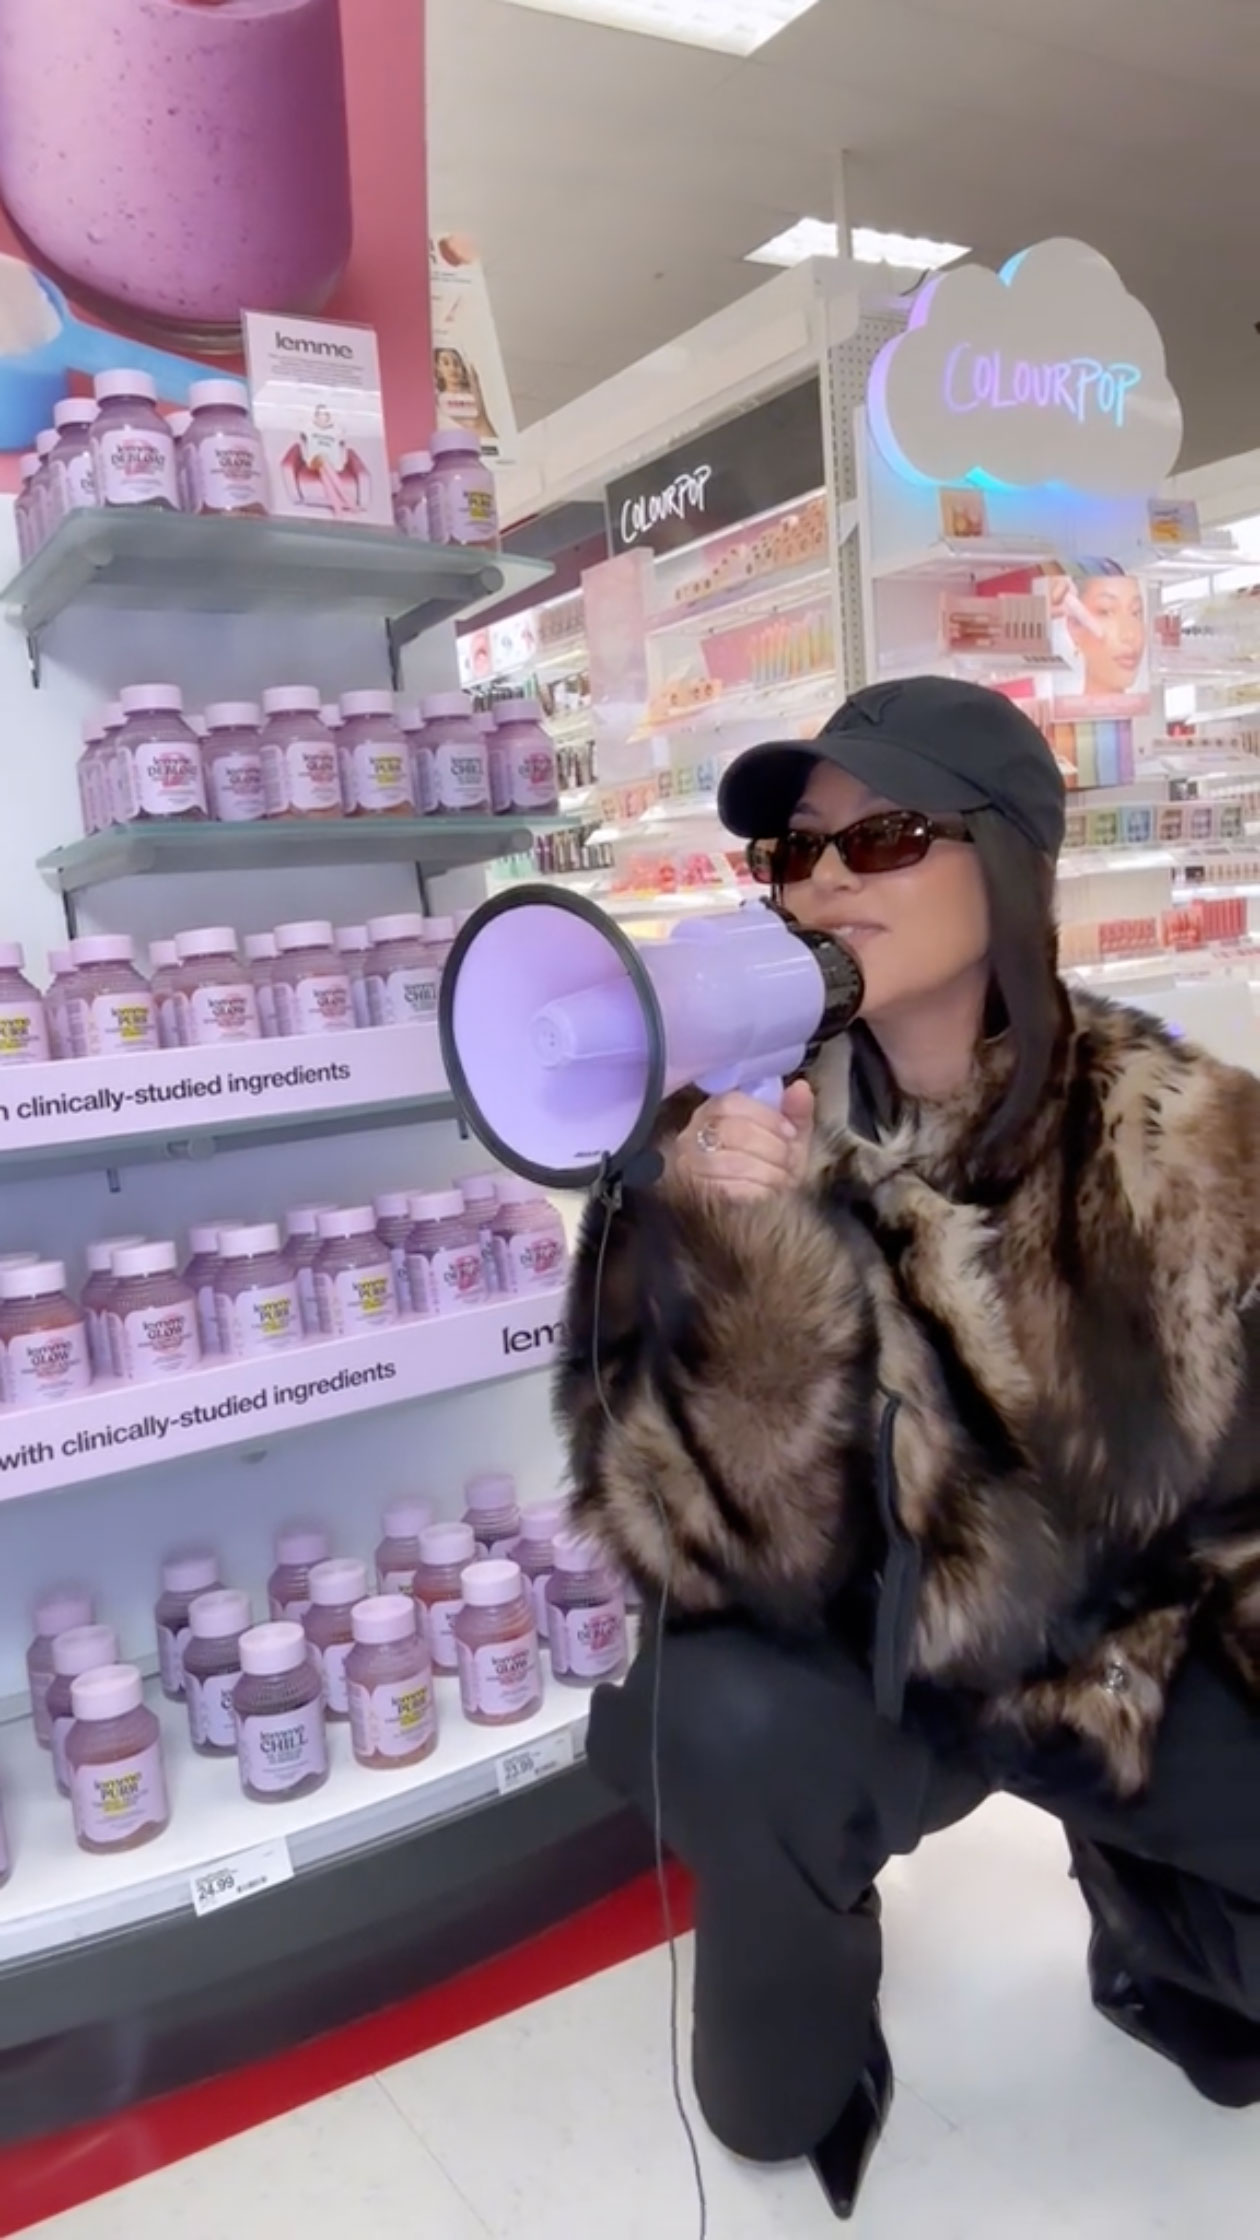 Kourtney went to a Target location to help promote her new collaboration